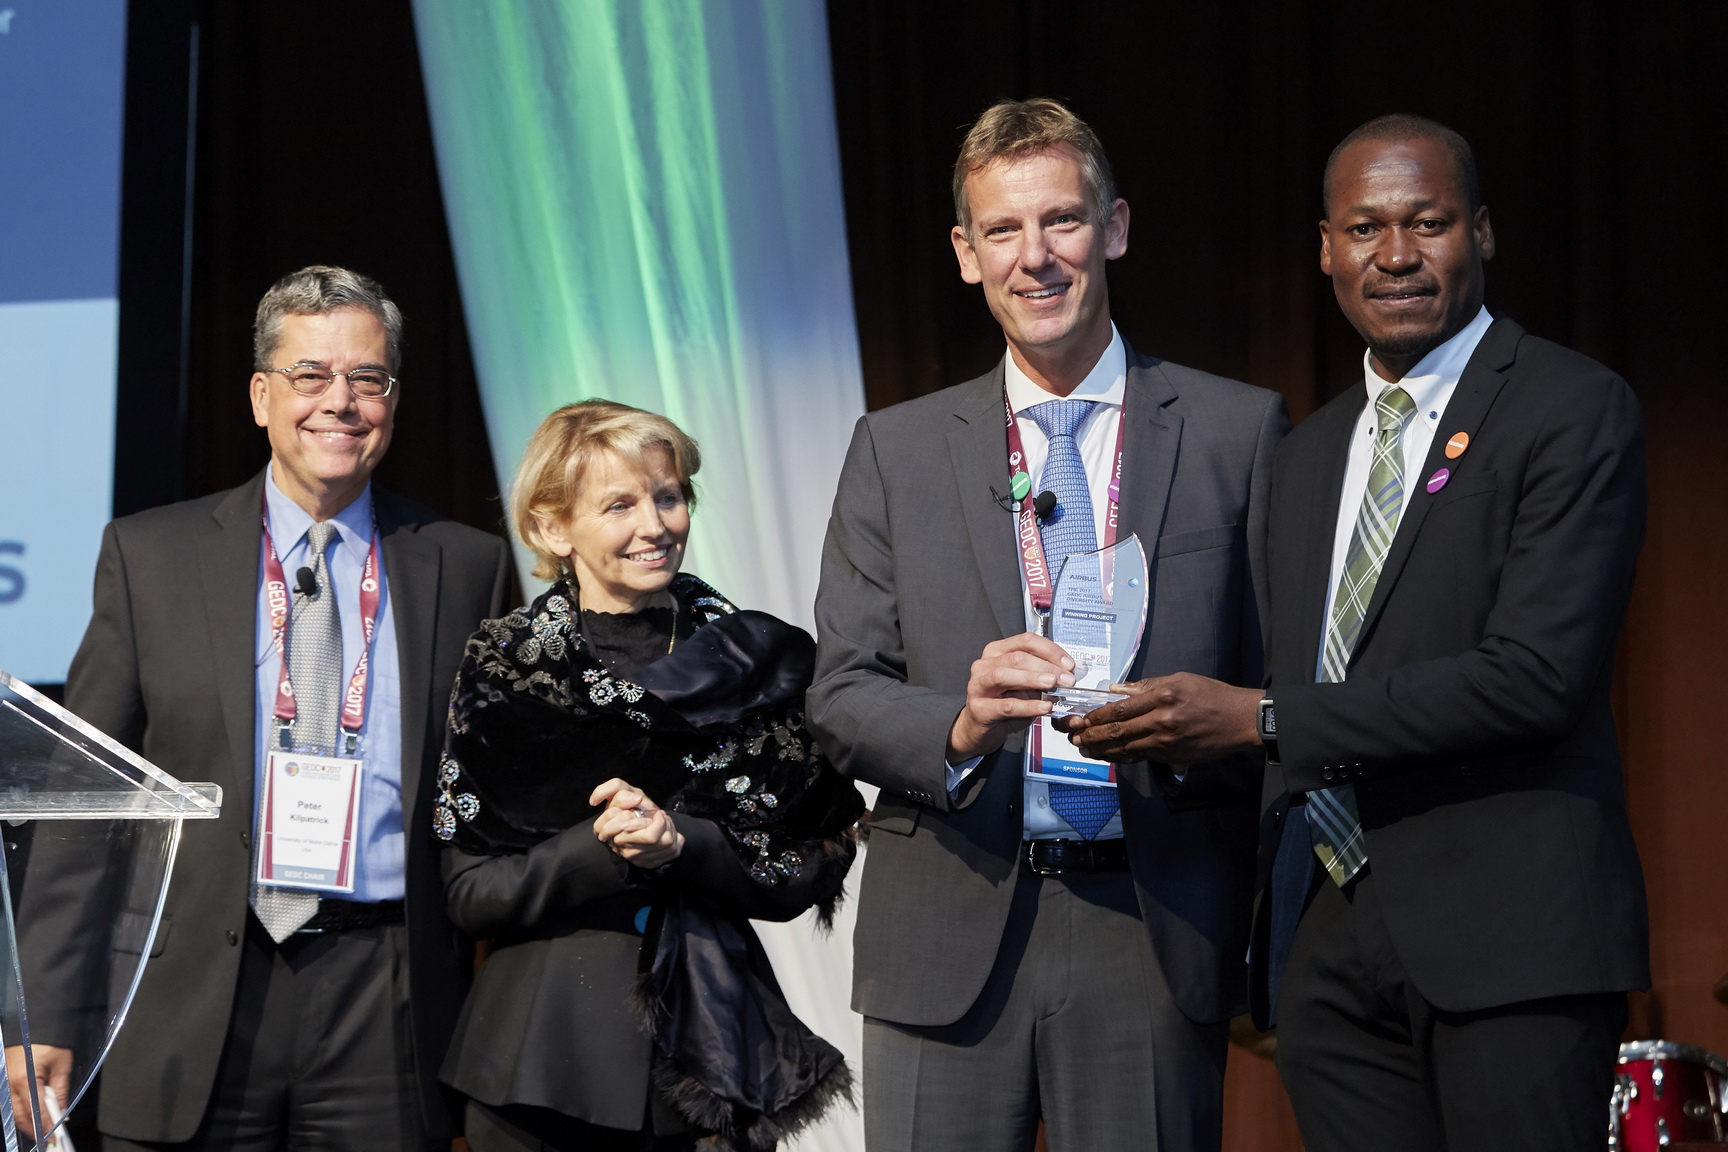 From right to left: Taiwo Tejumola; Jean-Brice Dumont; Marie Paule Roudil, director of the UNESCO Liaison Office, New York; and Peter Kilpatrick.